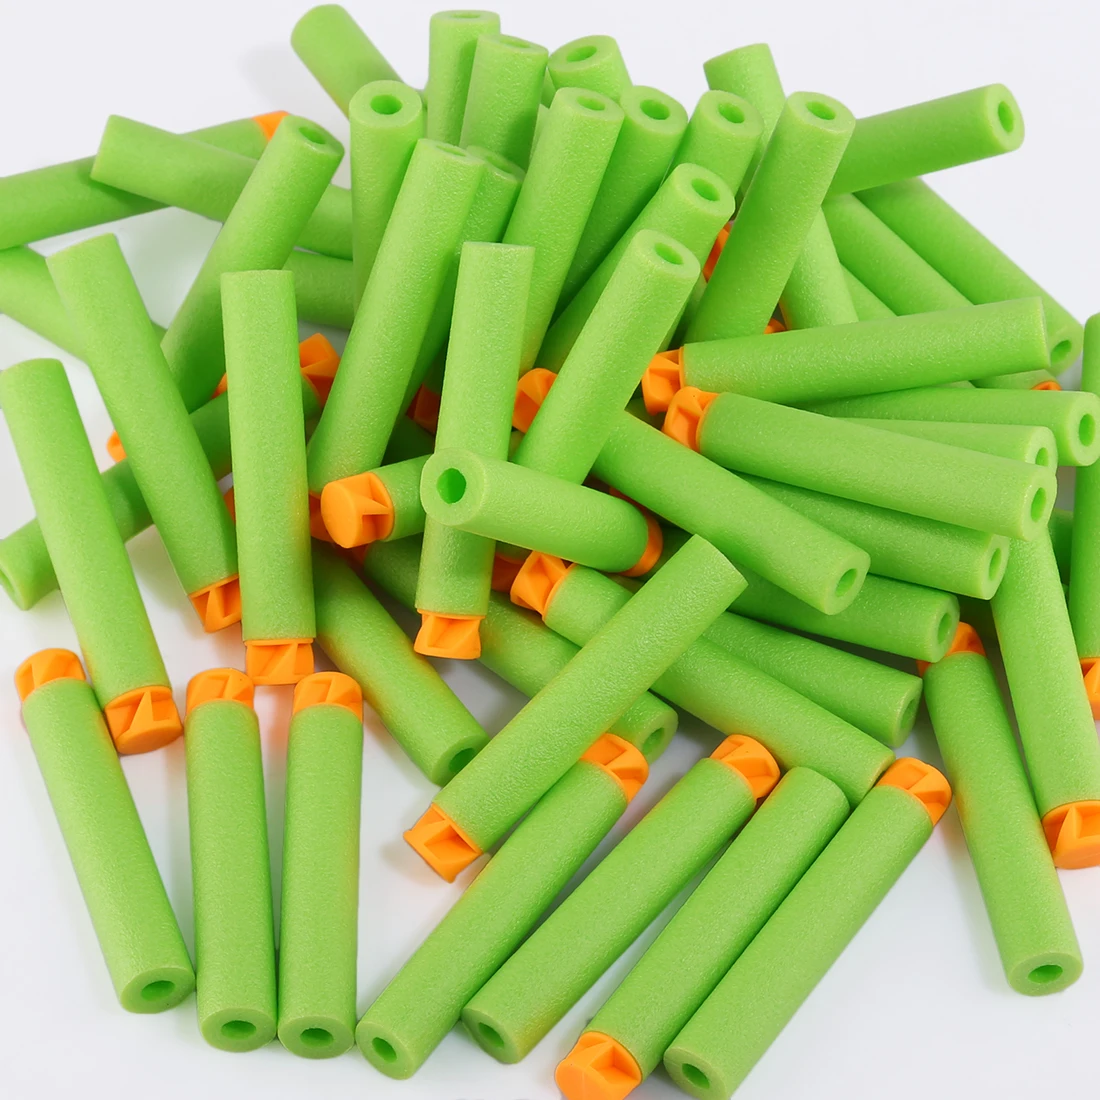 

200PCS For Nerf Bullets Soft Flat Head 7.2cm Refill Darts Toy Bullets for Nerf Series Blasters Kid Children Christmas Gifts